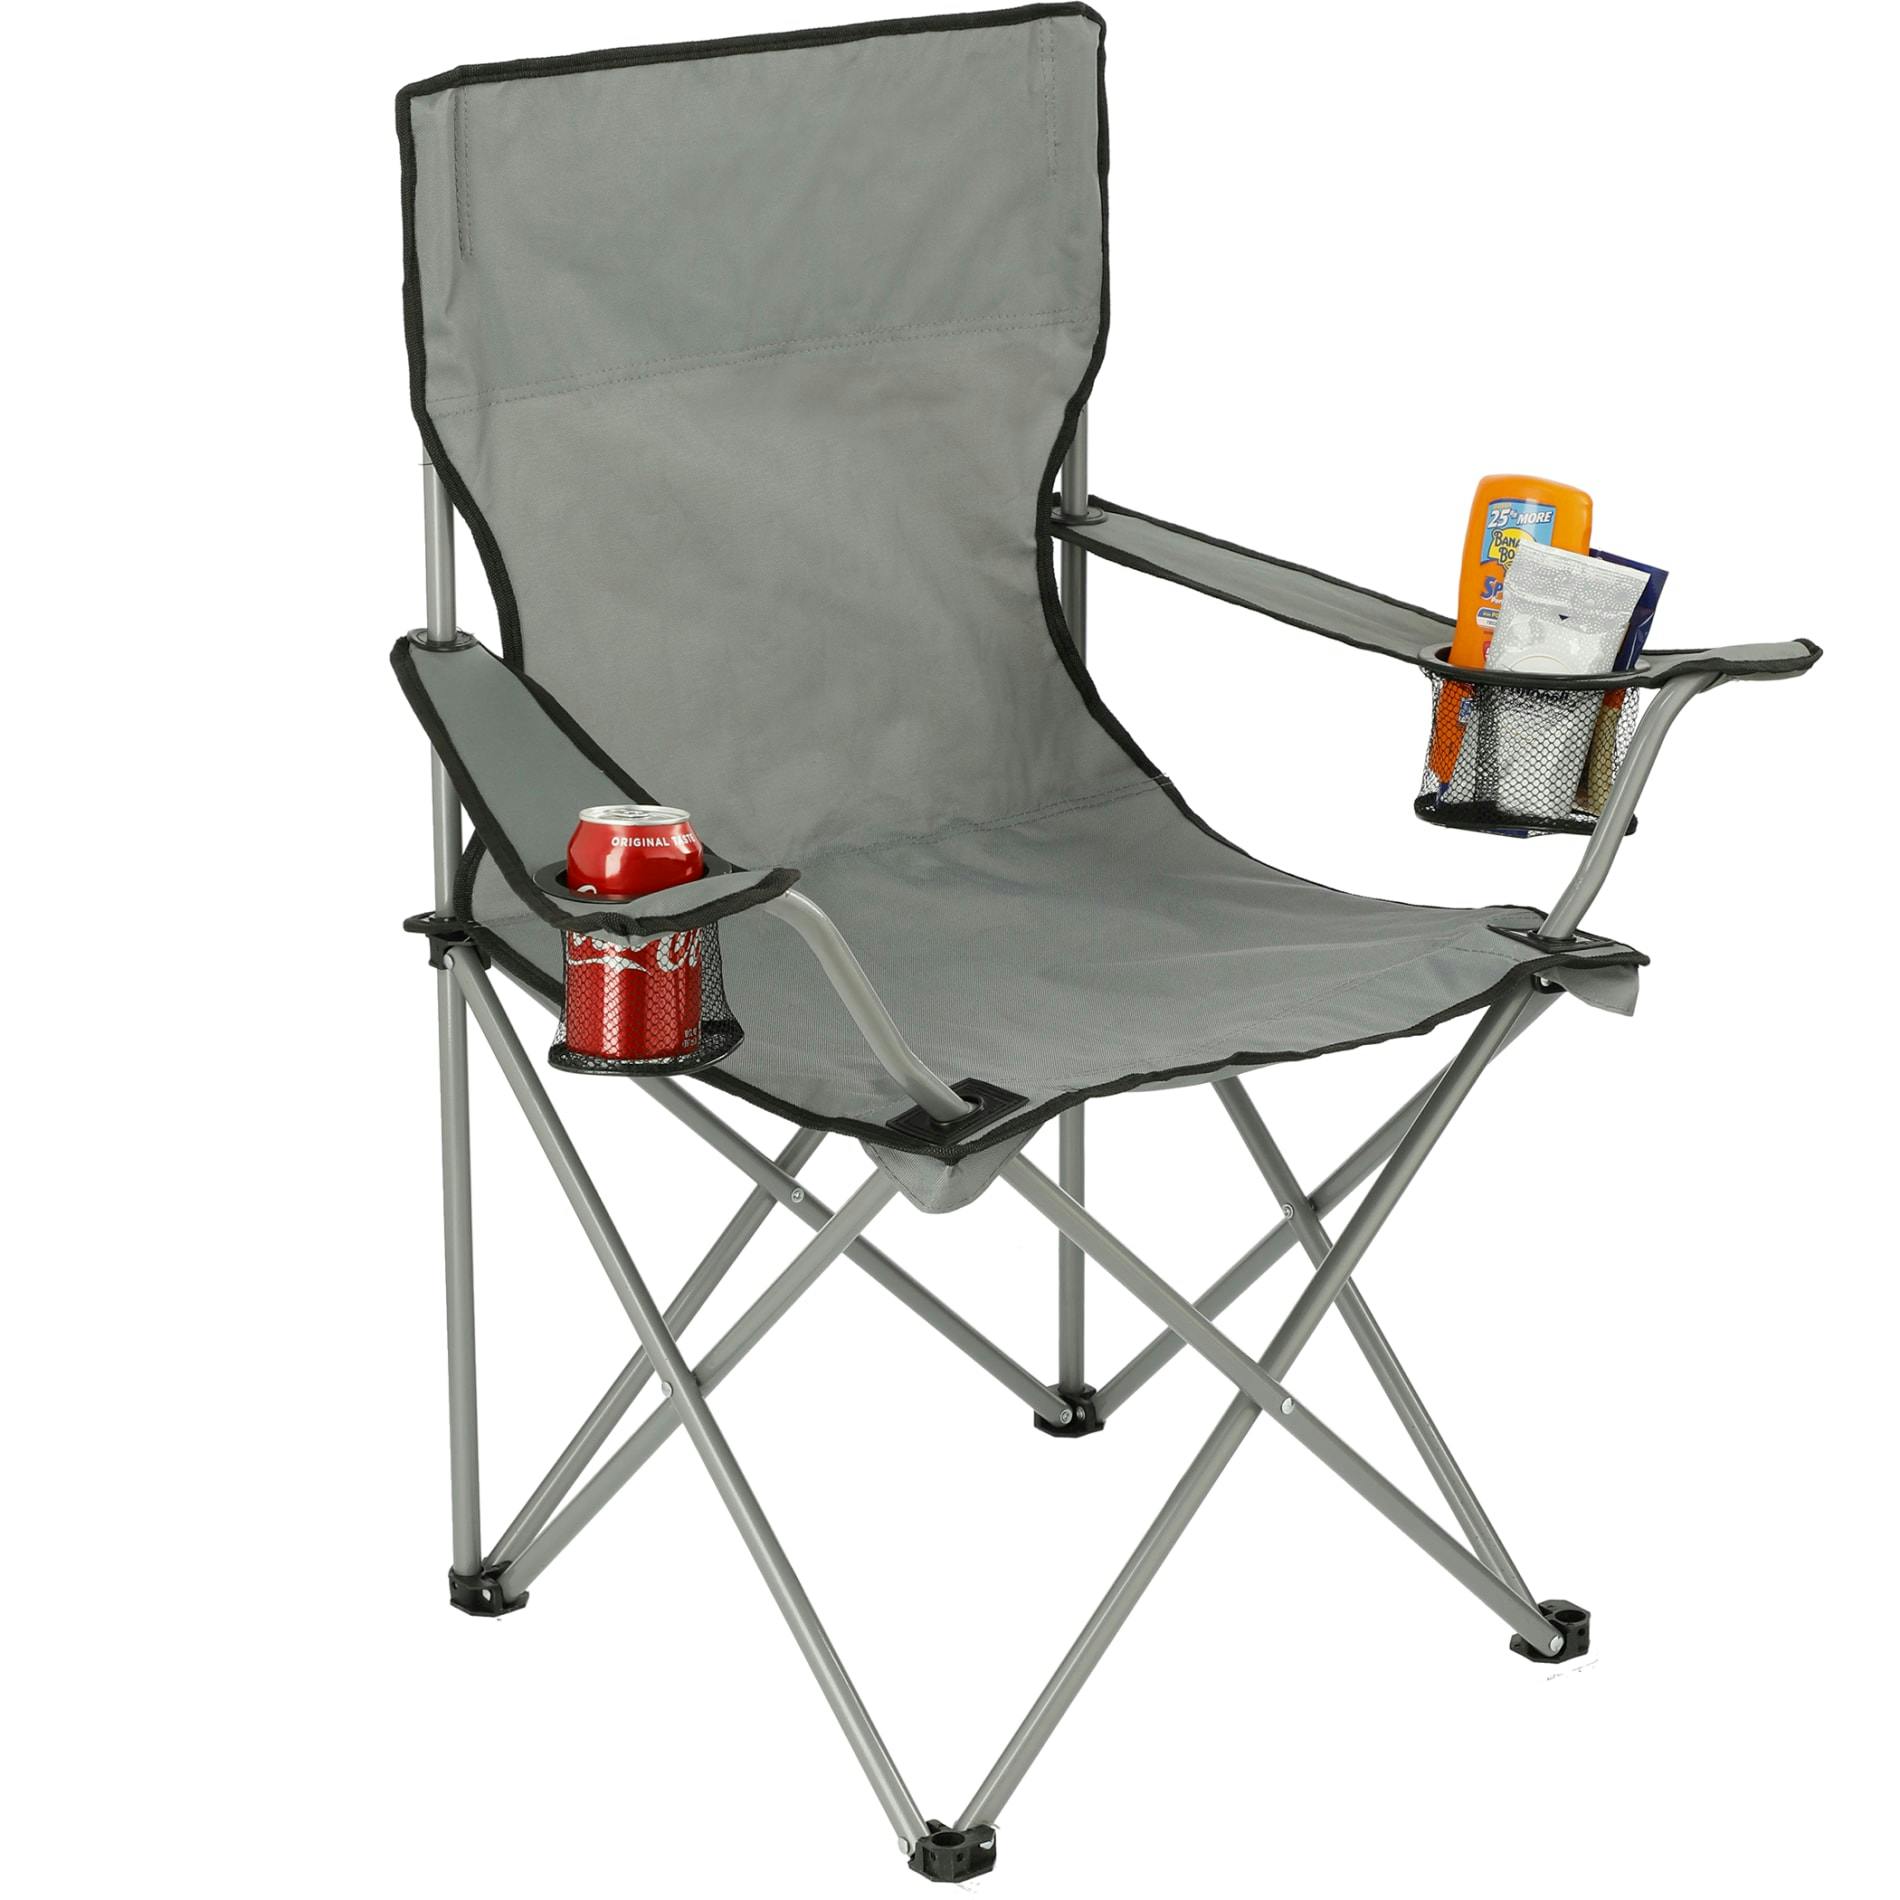 Fanatic Event Folding Chair - additional Image 2